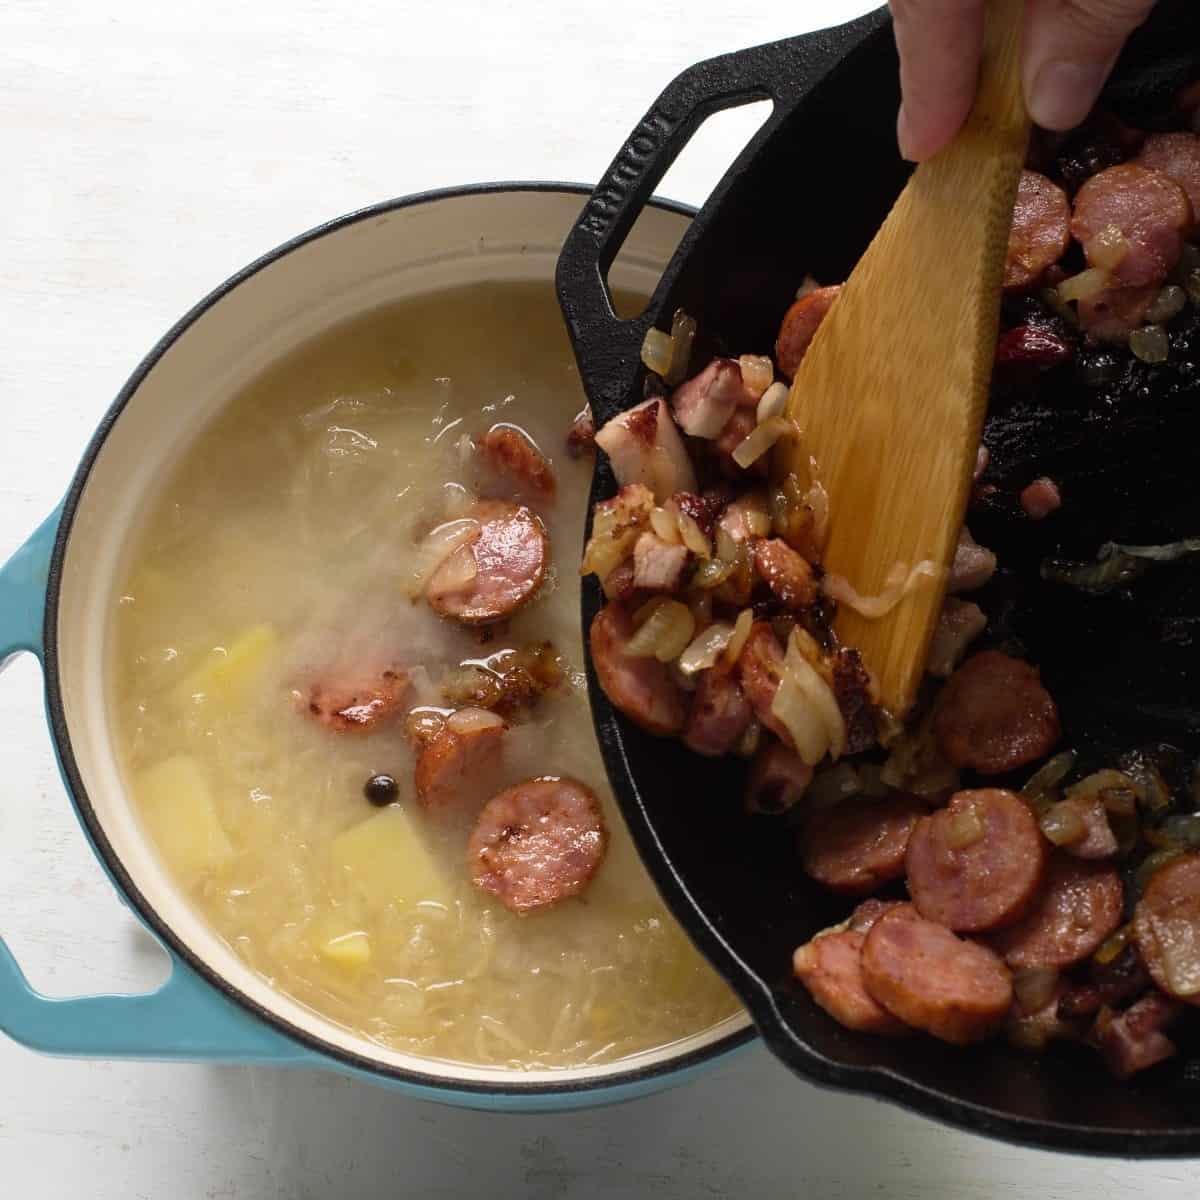 Adding fried slices of sausage and onion into Czech Kyselica soup.